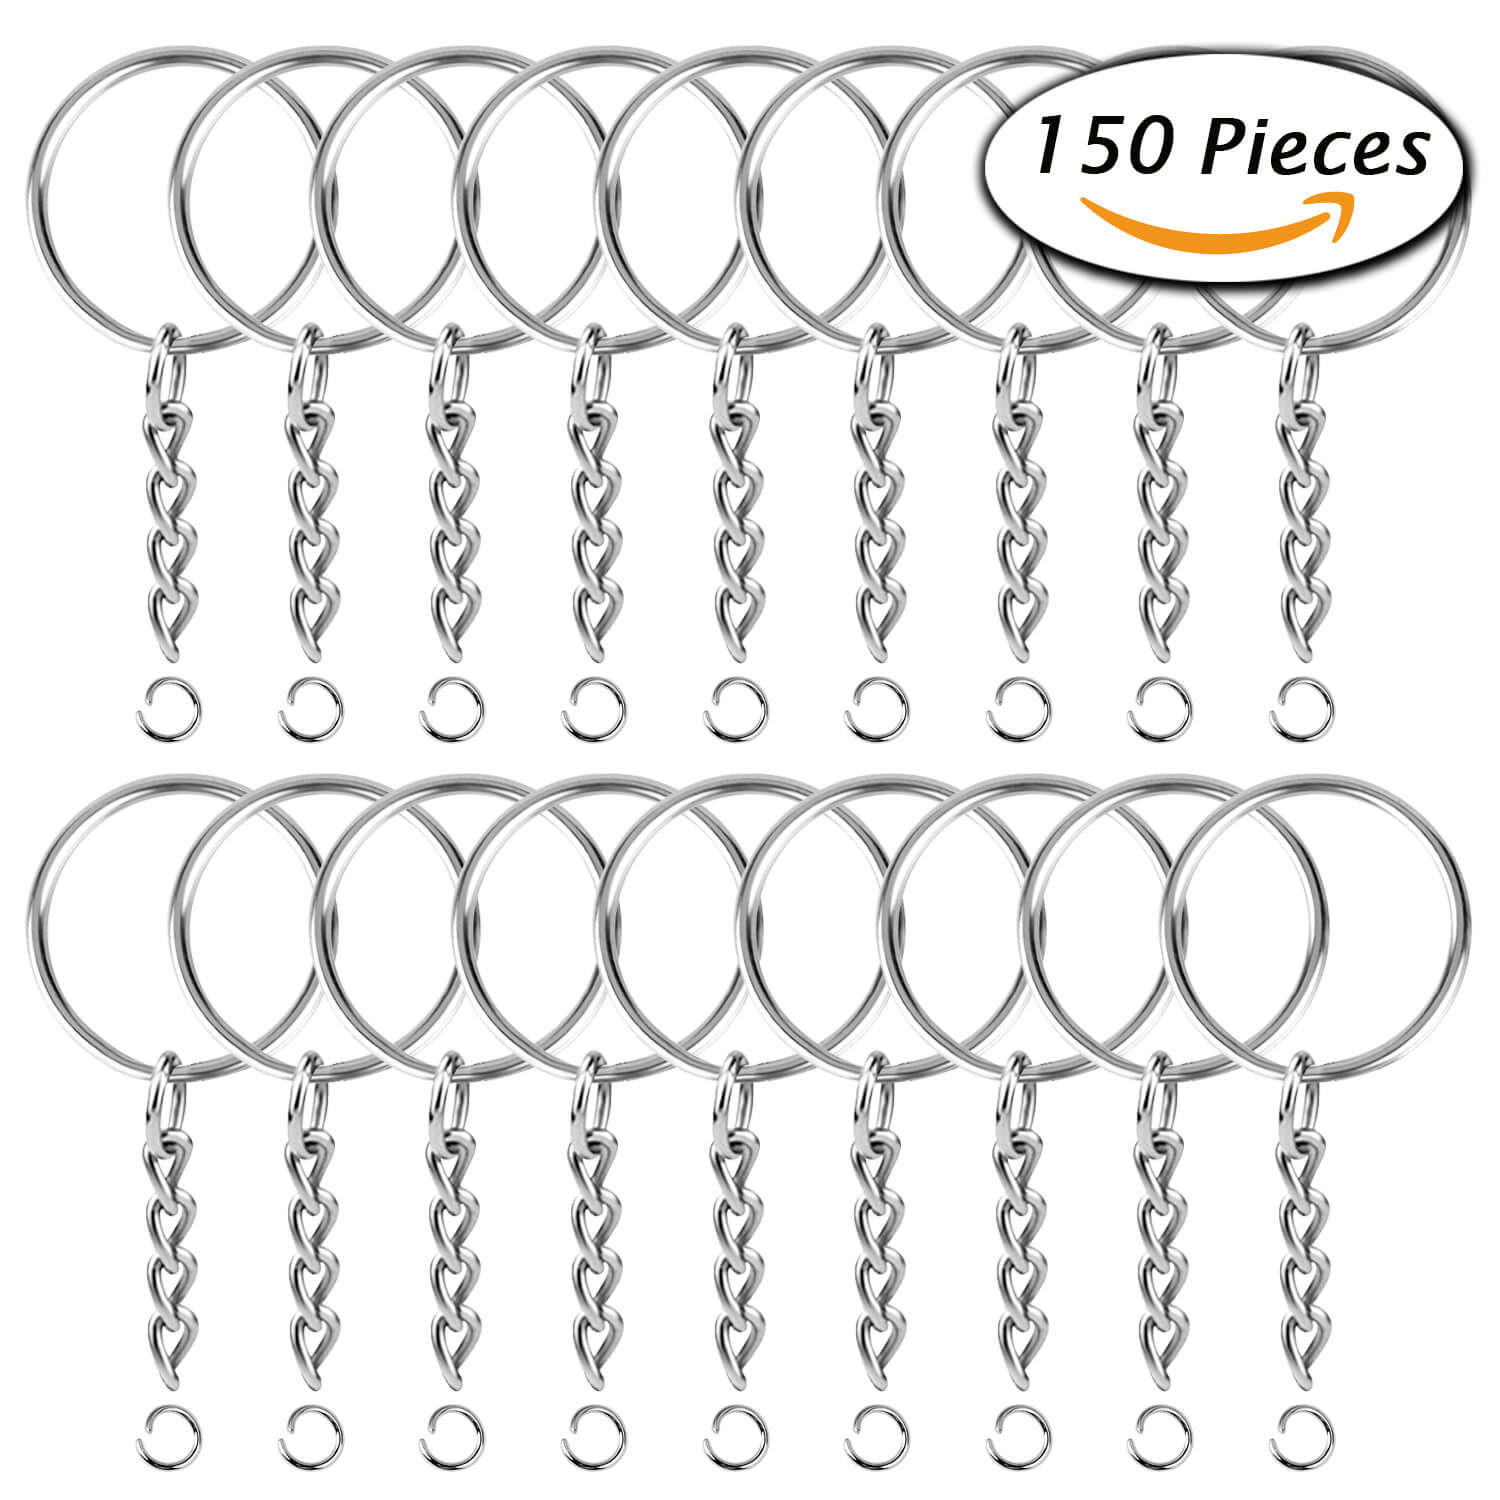 Paxcoo 100 Pack Keyrings, Split Key Rings Bulk for Keychain and Crafts (1  Inch)